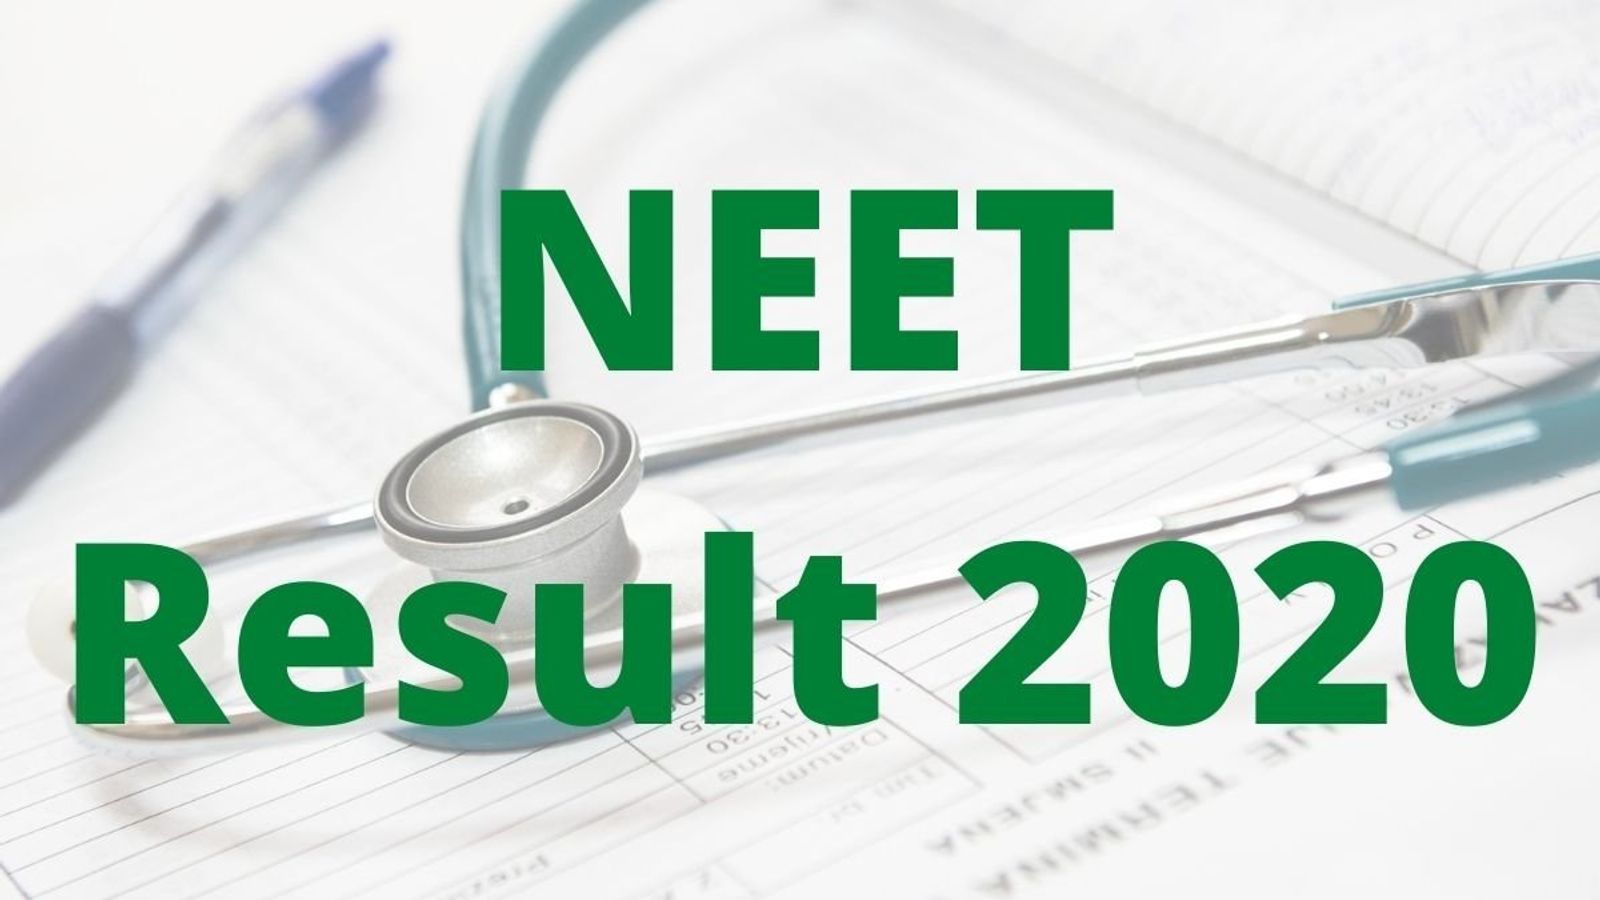 neet result 2020 date and time